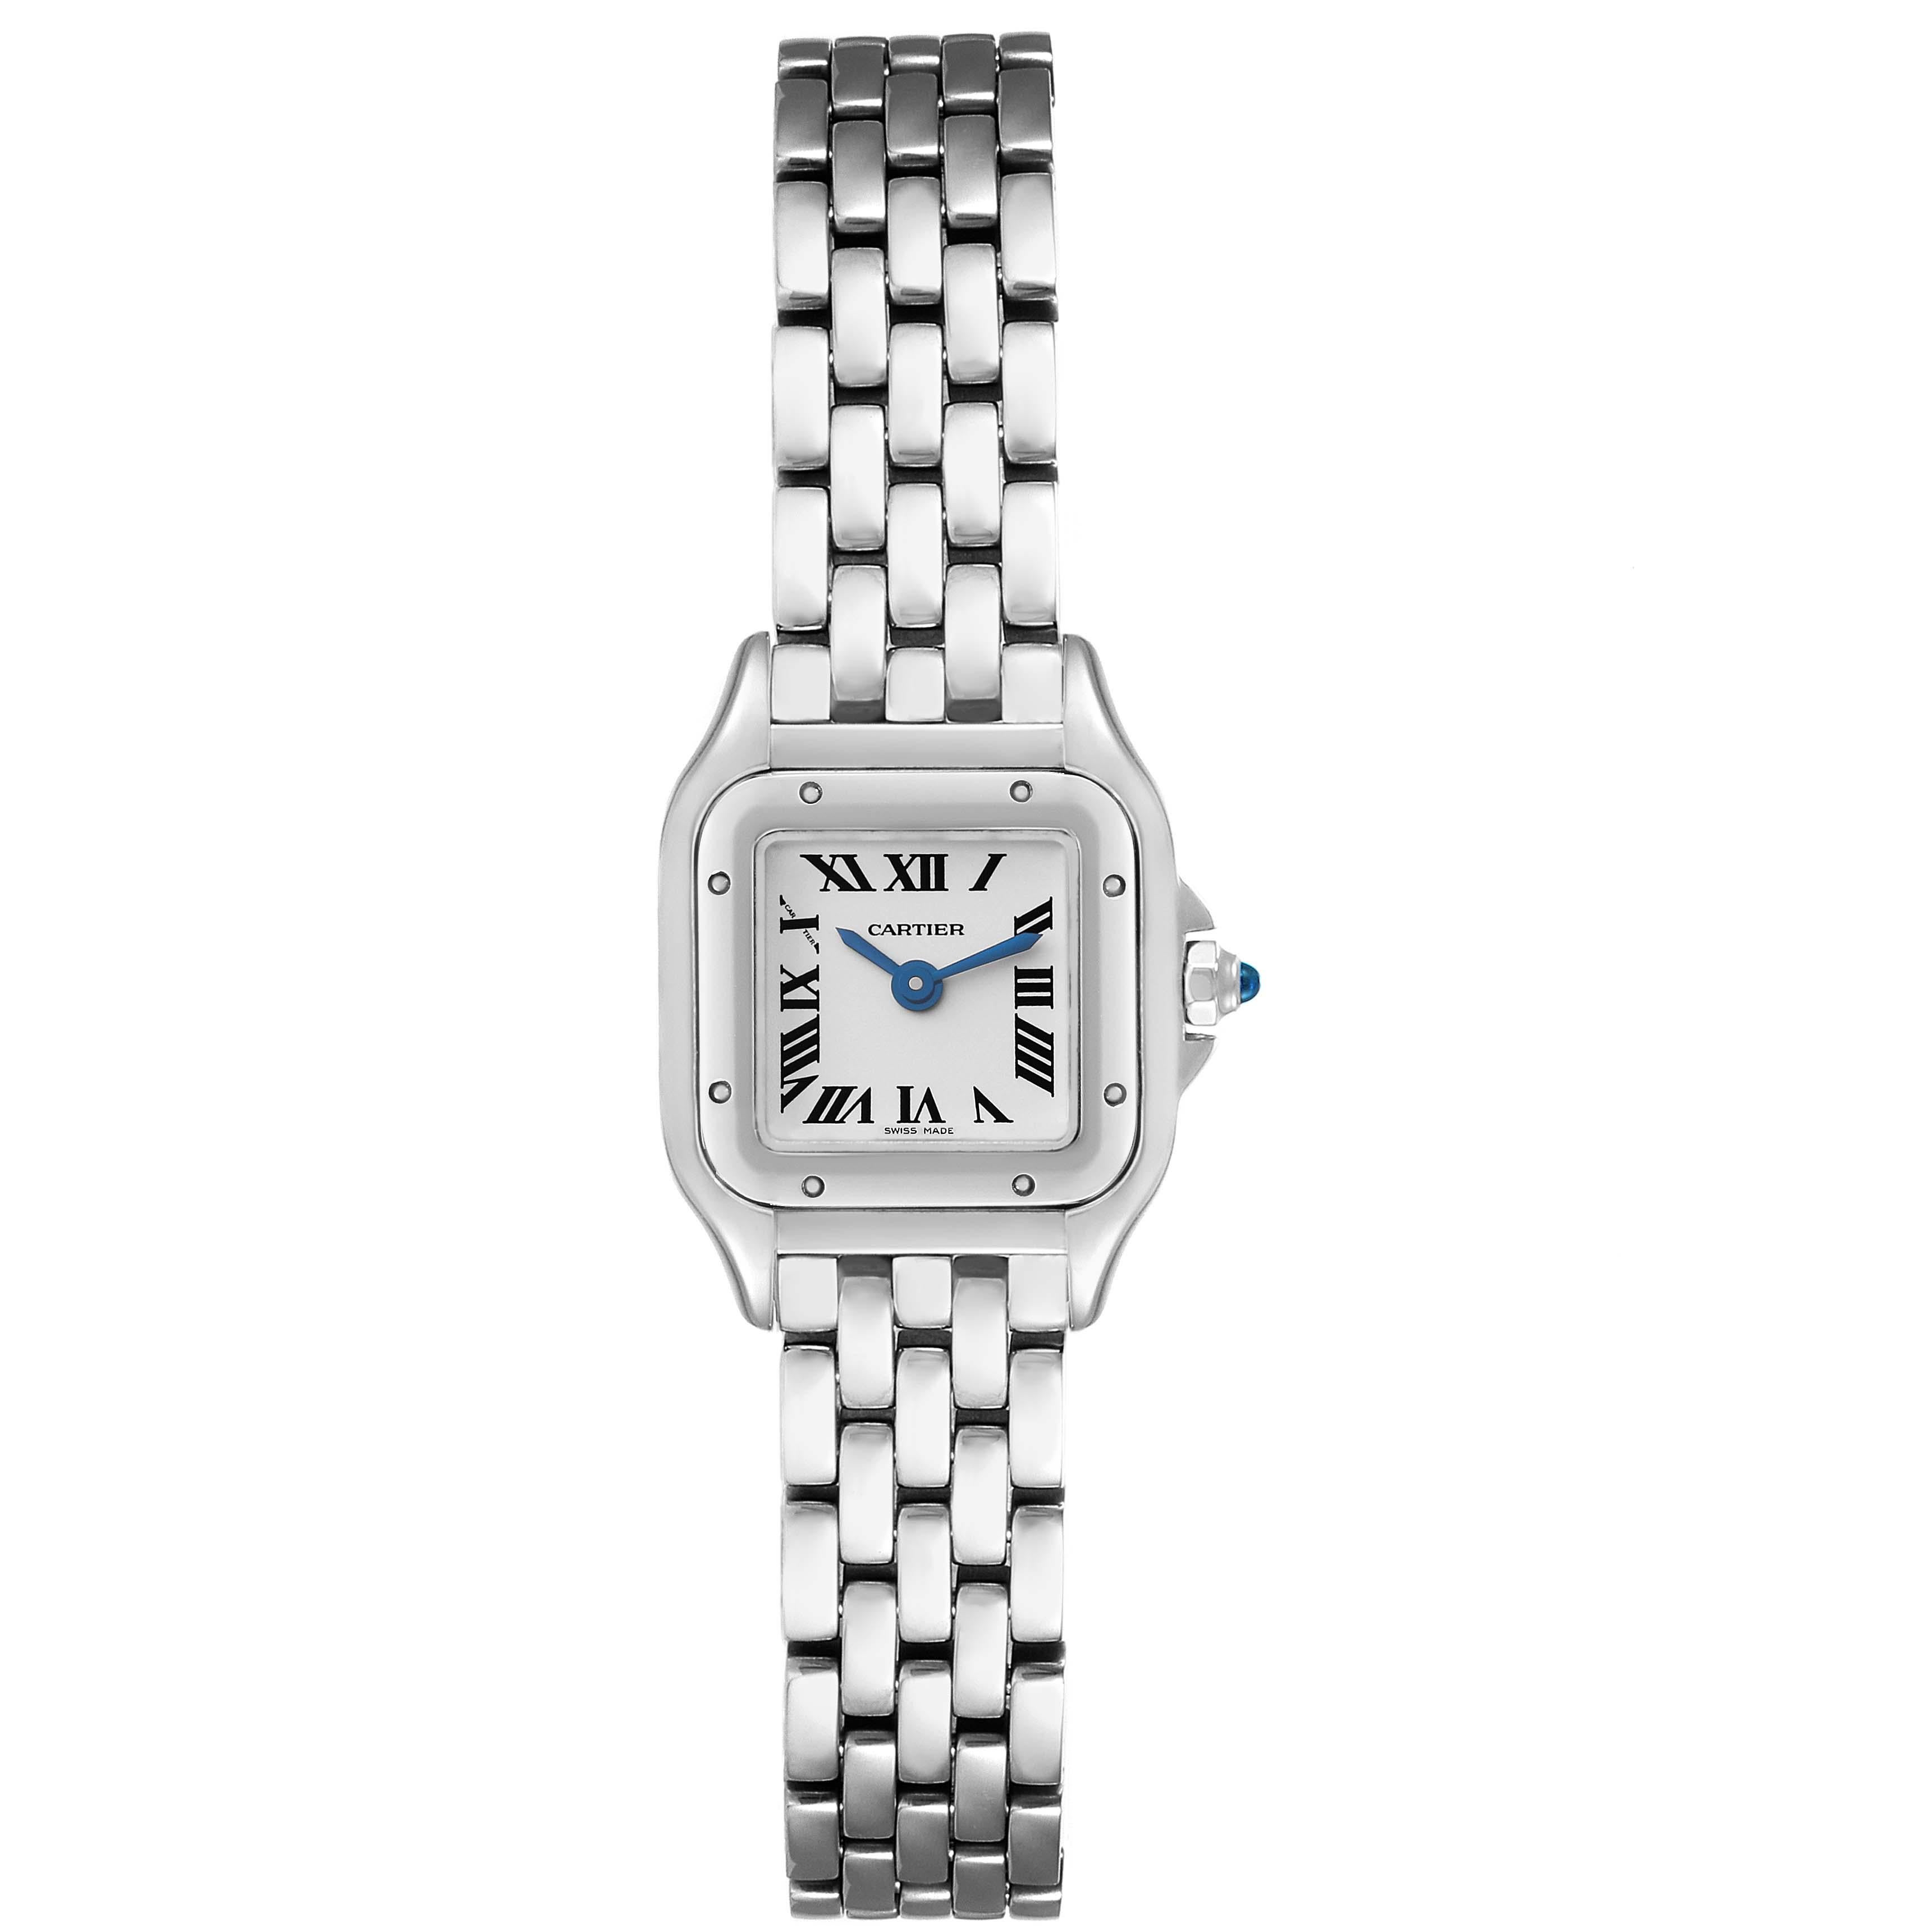 Cartier Panthere Mini Stainless Steel Ladies Watch WSPN0019 Box Card. Quartz movement. Stainless steel case 25.0 x 21.0 mm. Octagonal crown set with blue spinel cabochon. Stainless steel polished bezel, secured with 8 stainless steel pins. Scratch